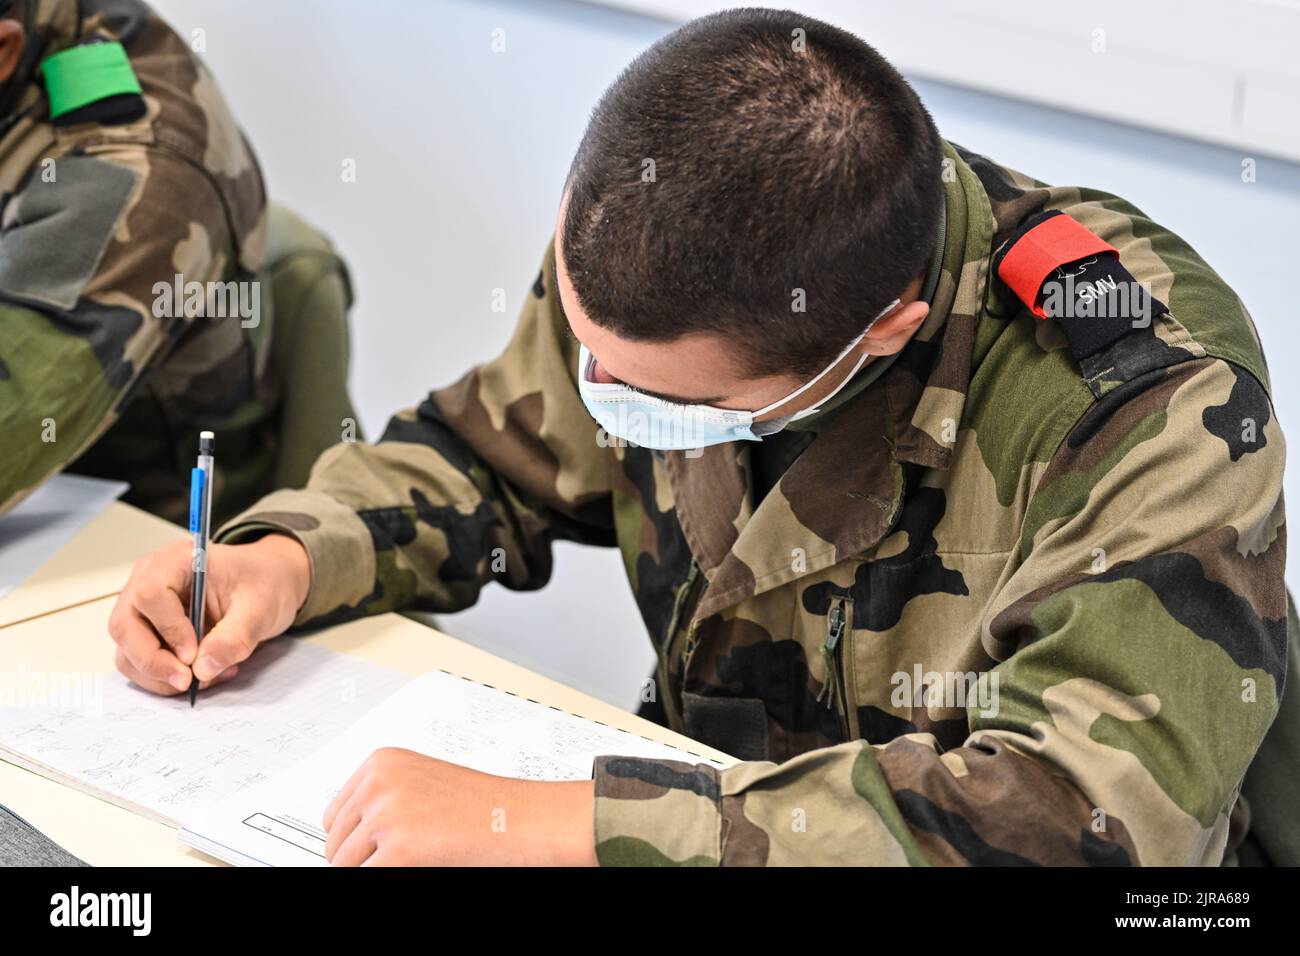 Amberieu-en-Bugey (central-eastern France): trainees of the Voluntary Military Service (SMV) that aims to give young people who have dropped out of th Stock Photo